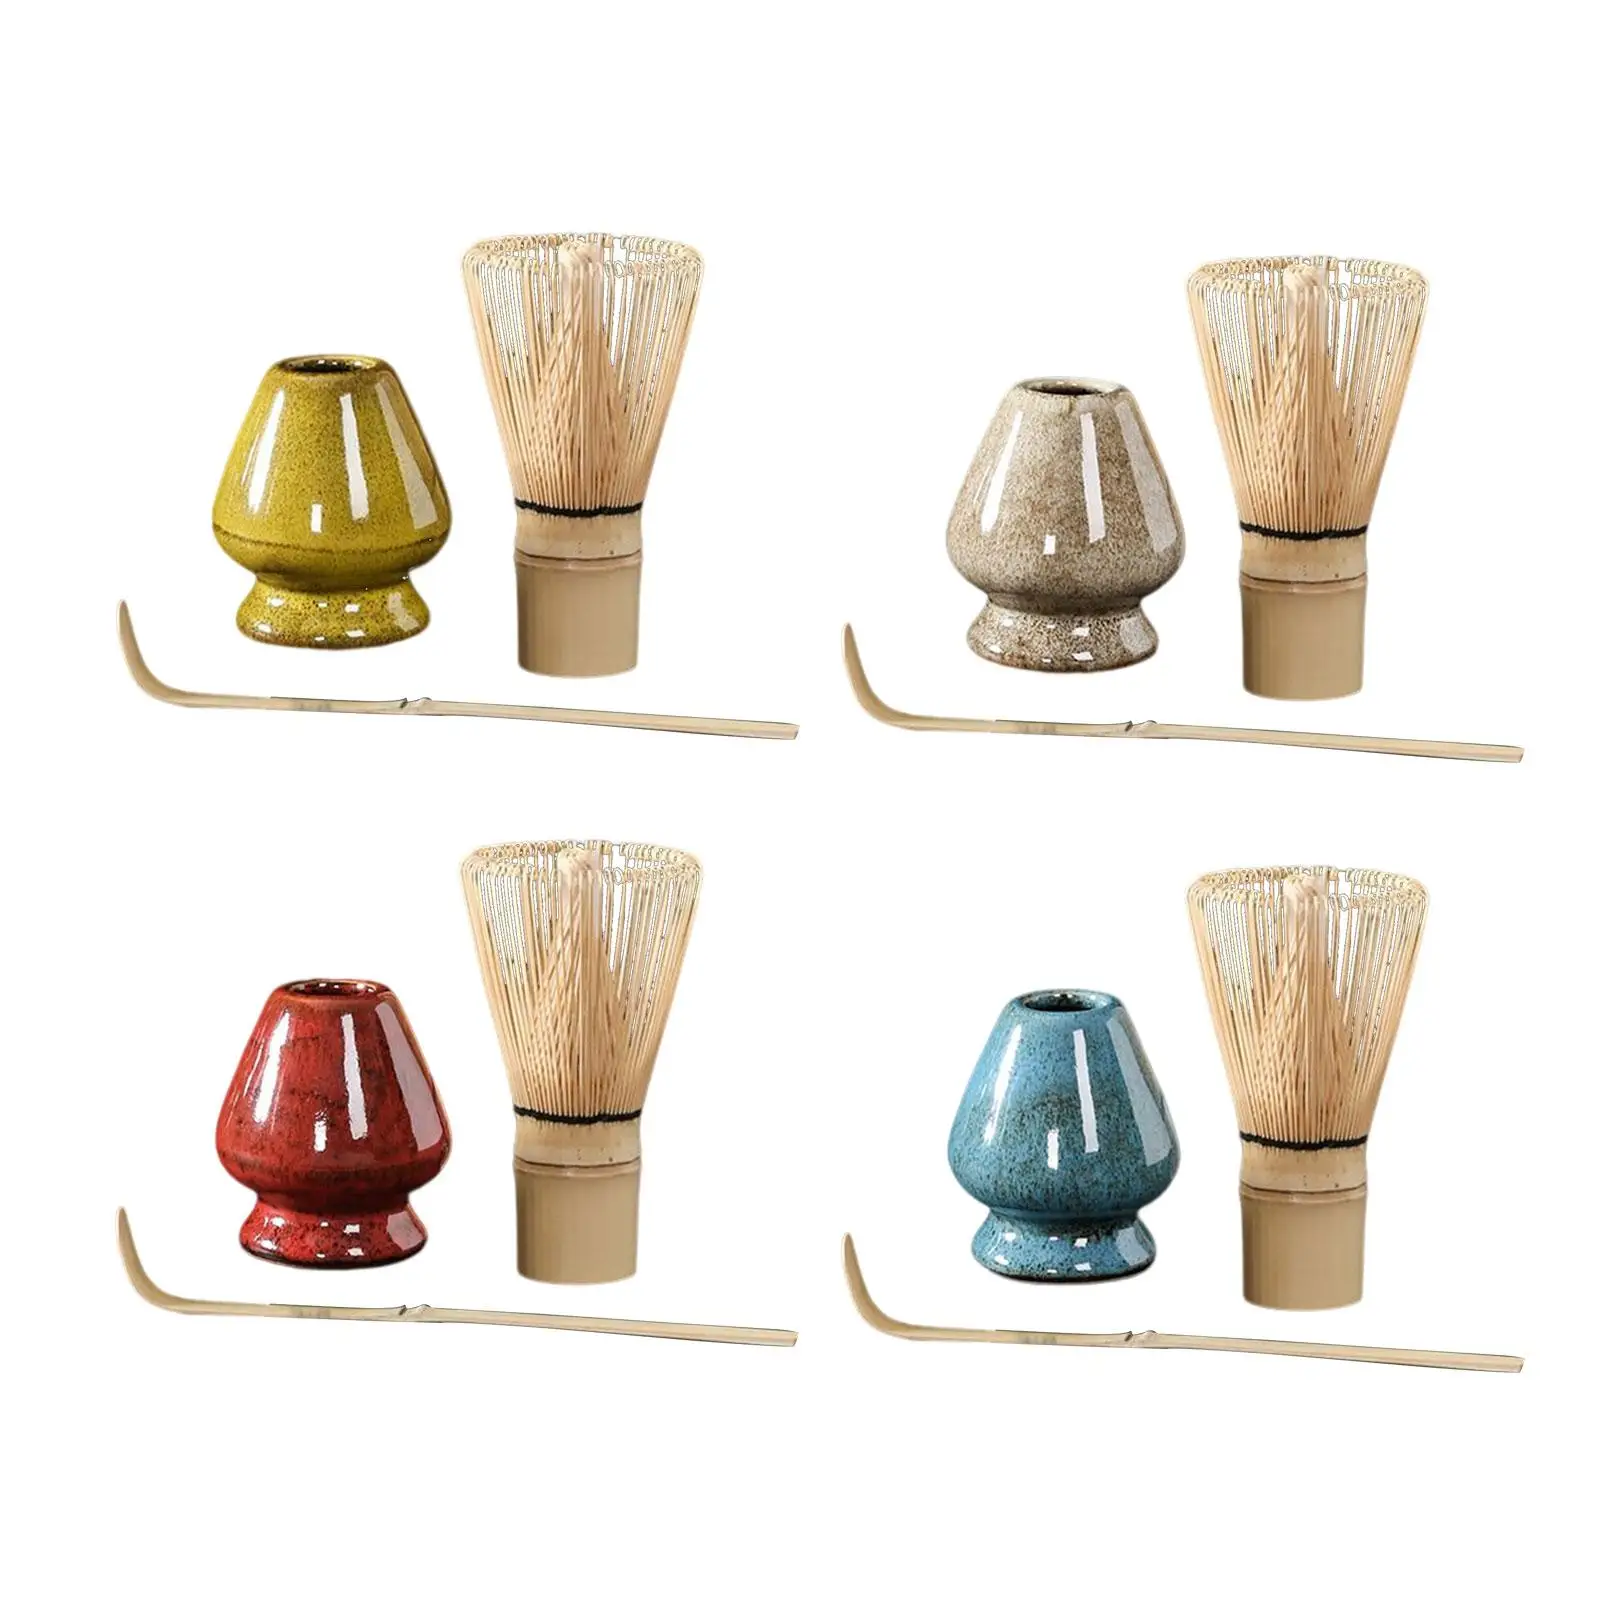 

3x Ceramic Matcha Ceremony Set Matcha scoops Whisk Tea Making Tools Matcha Whisk Holder for Party Gift Greeting Kitchen Baby